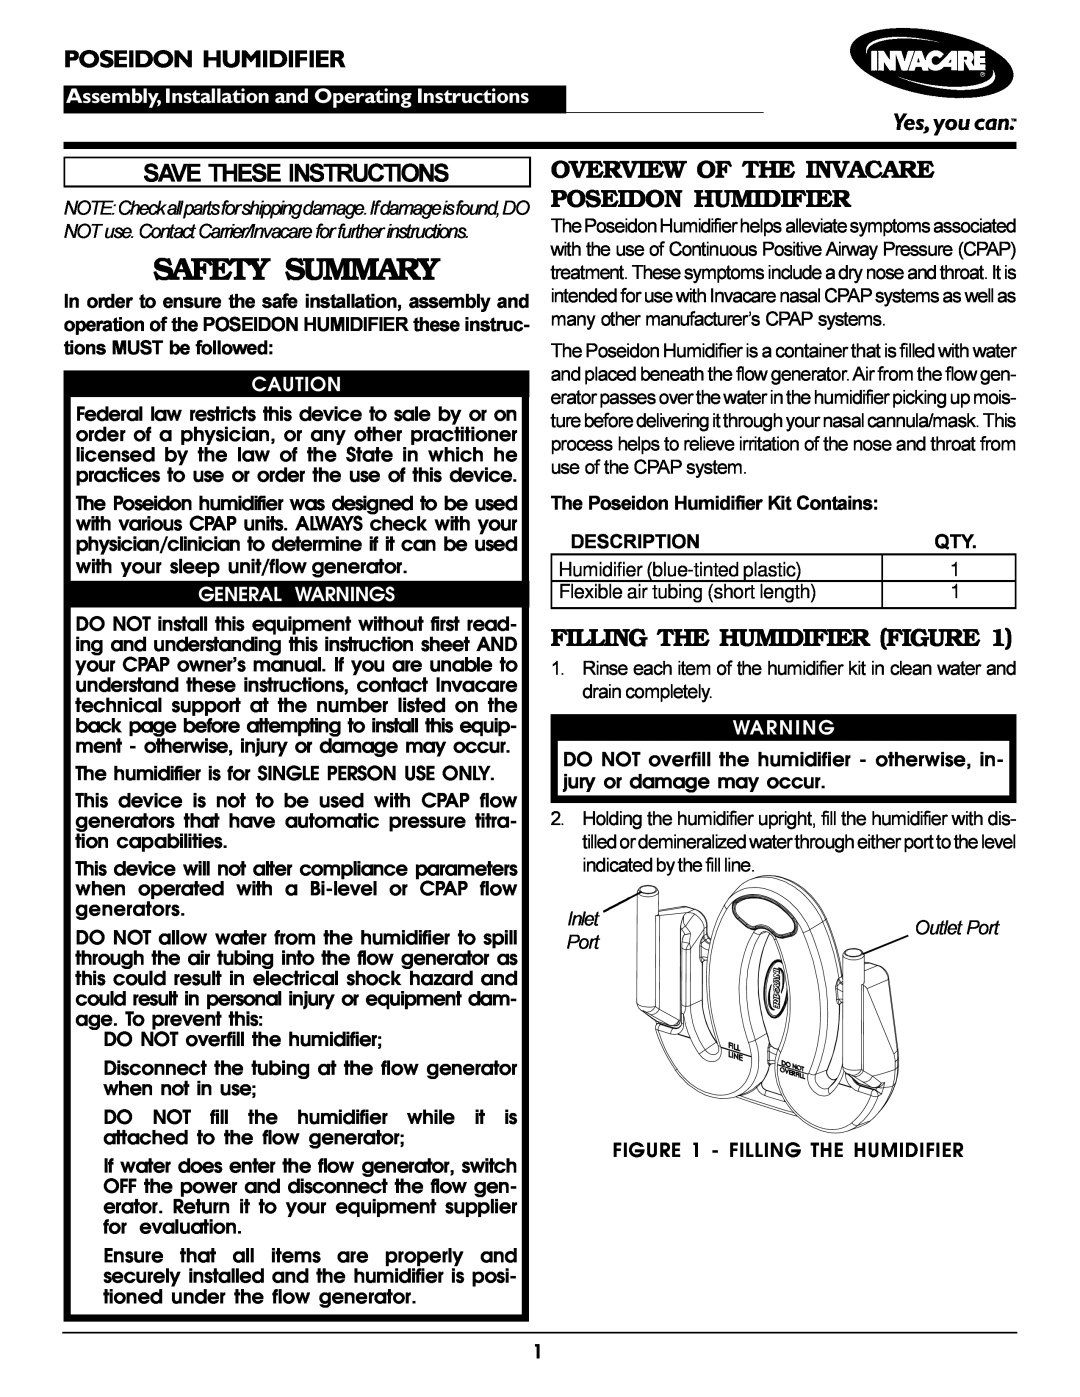 Invacare instruction sheet Overview Of The Invacare Poseidon Humidifier, Filling The Humidifier Figure, Safety Summary 